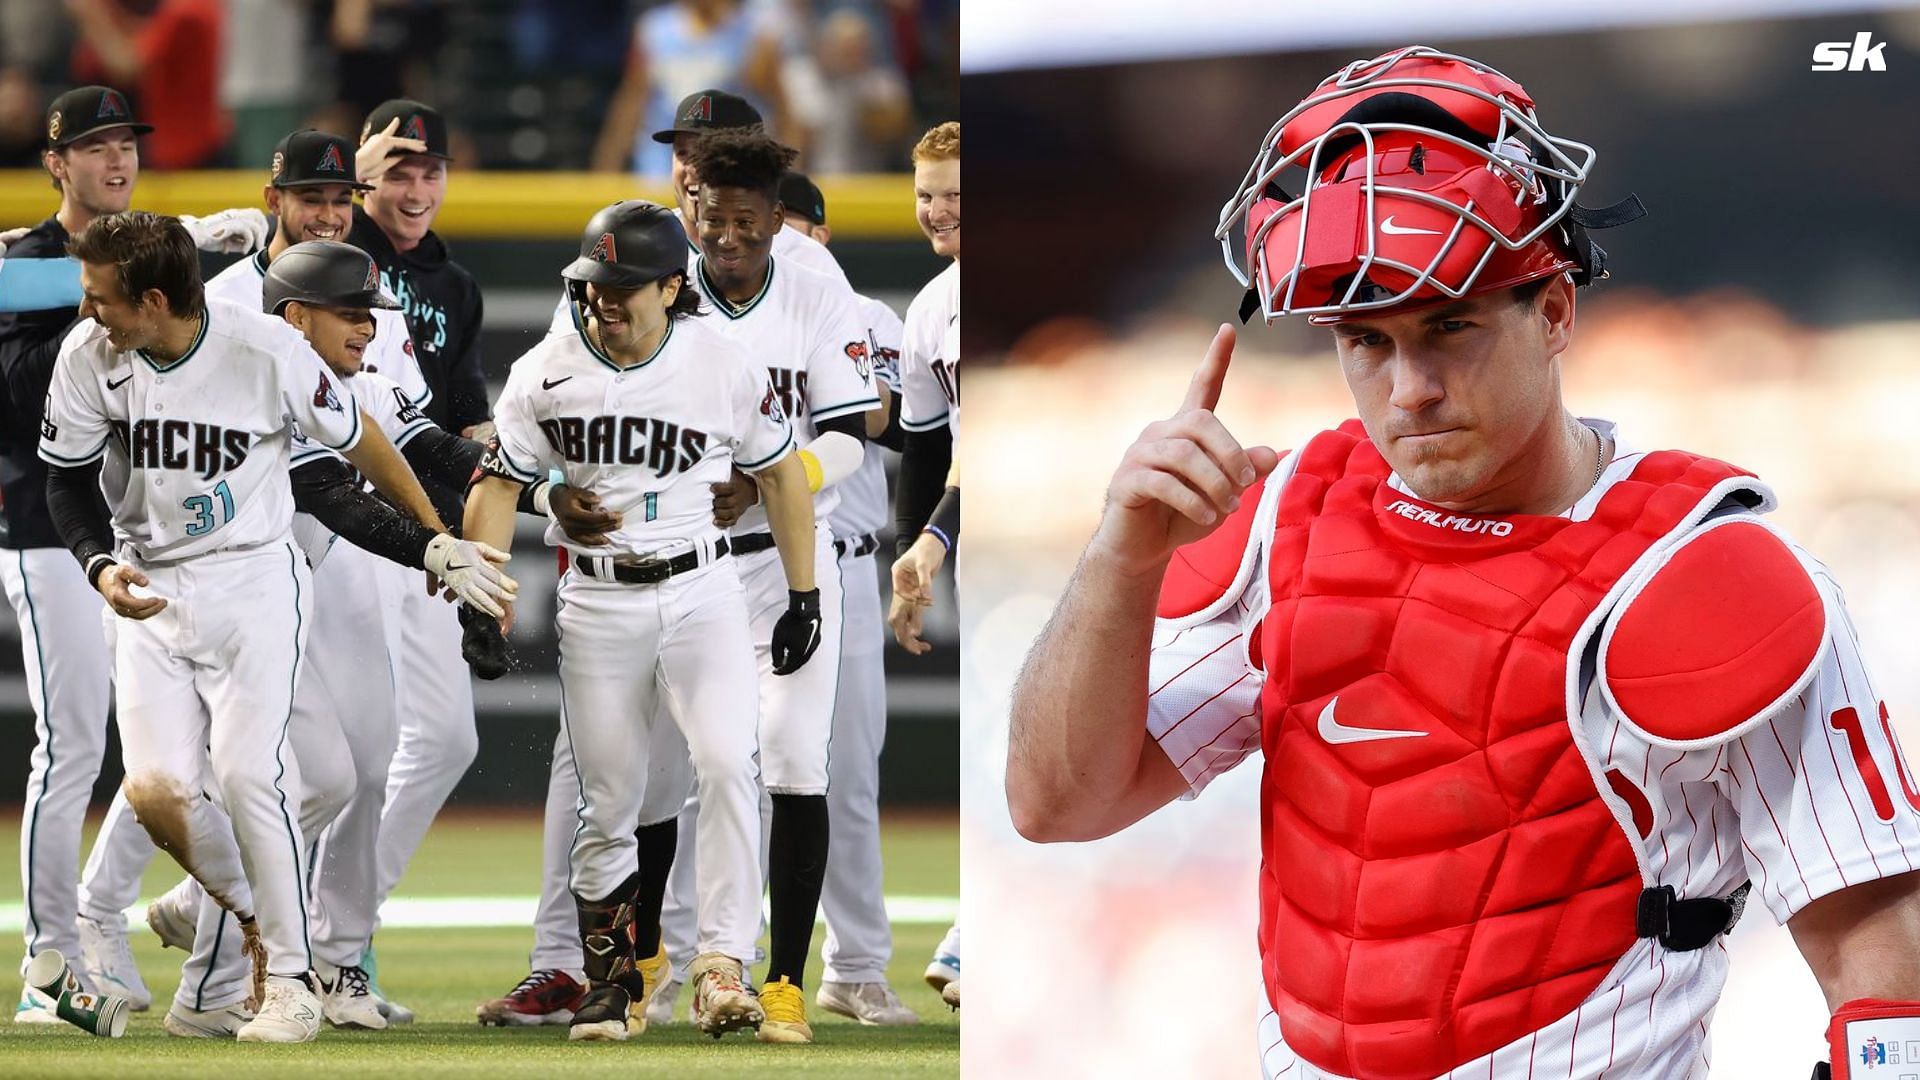 Realmuto to start at catcher for National League in All-Star Game